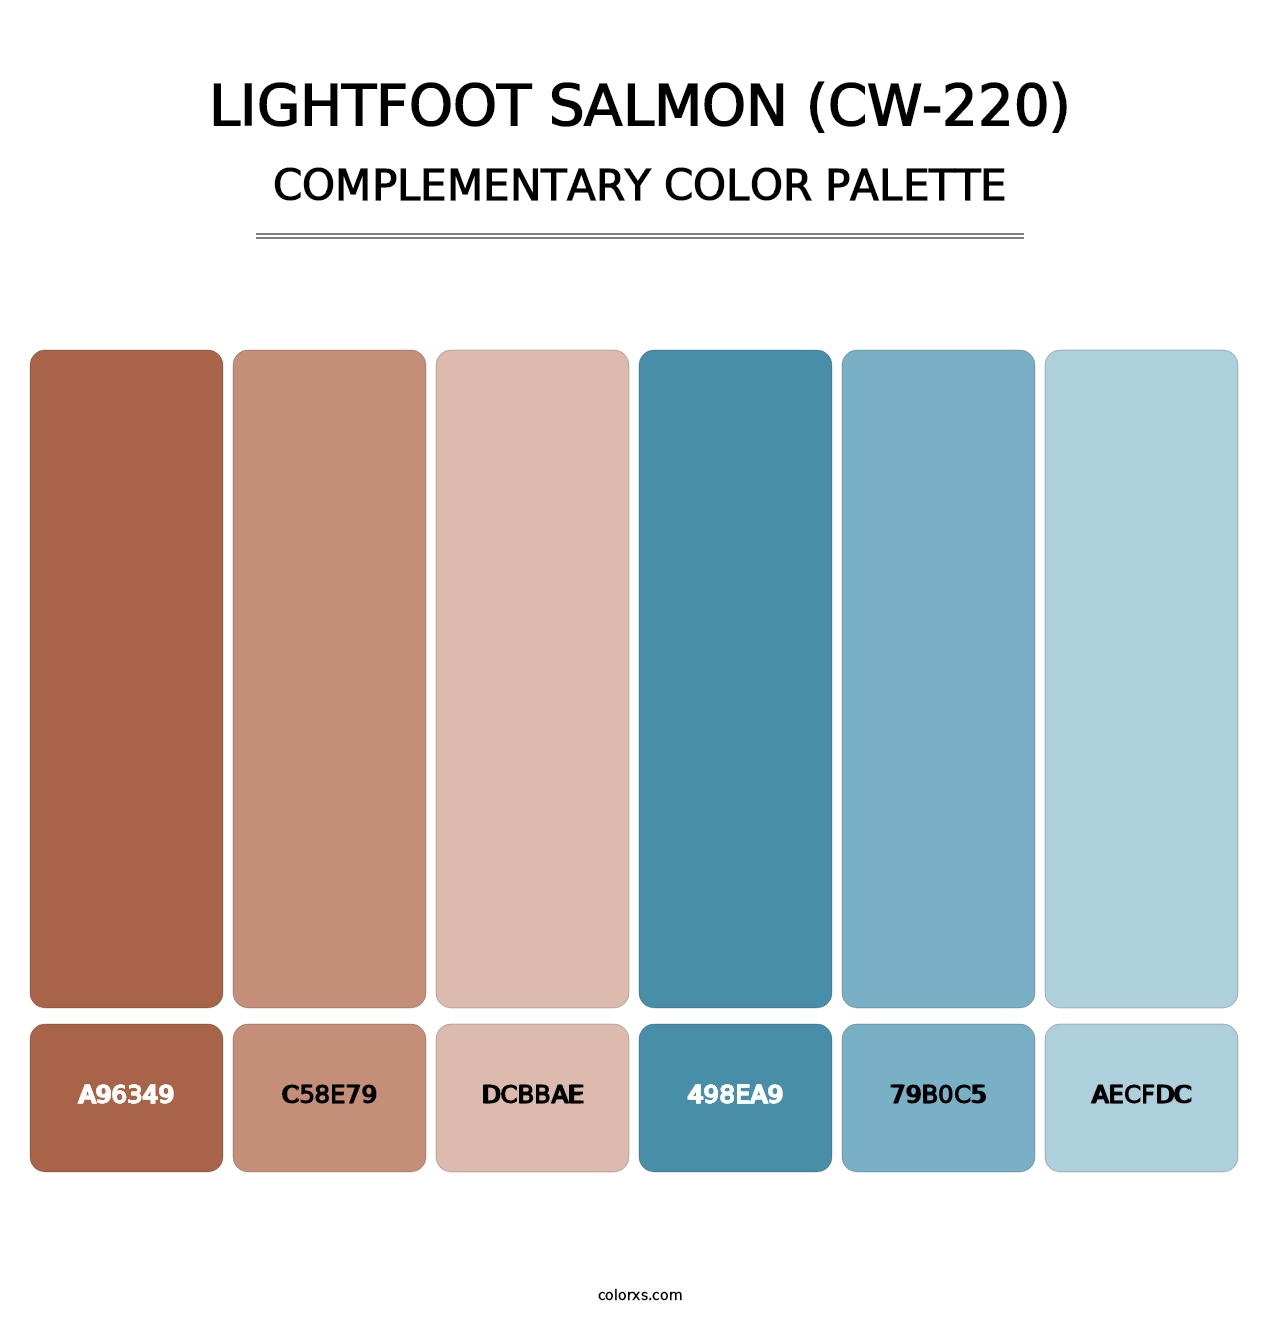 Lightfoot Salmon (CW-220) - Complementary Color Palette